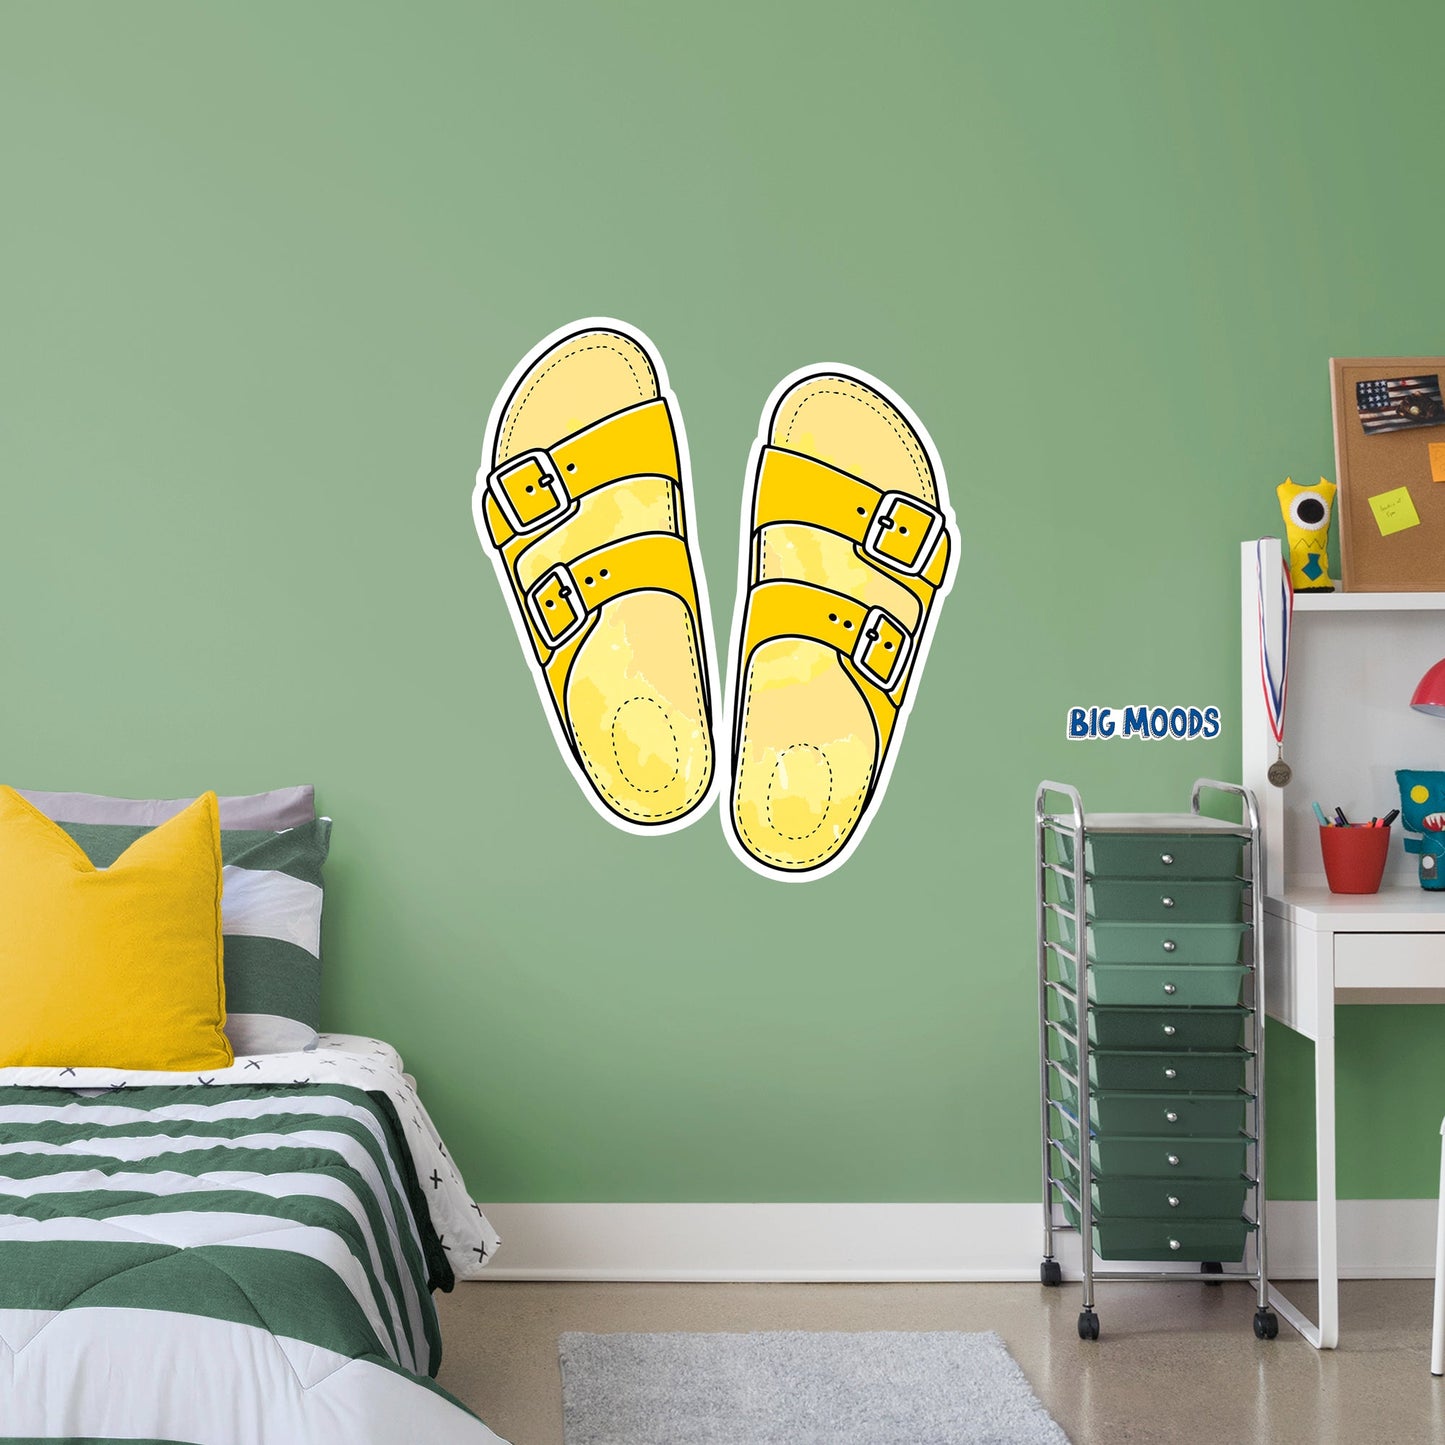 Sandals (Yellow)        - Officially Licensed Big Moods Removable     Adhesive Decal